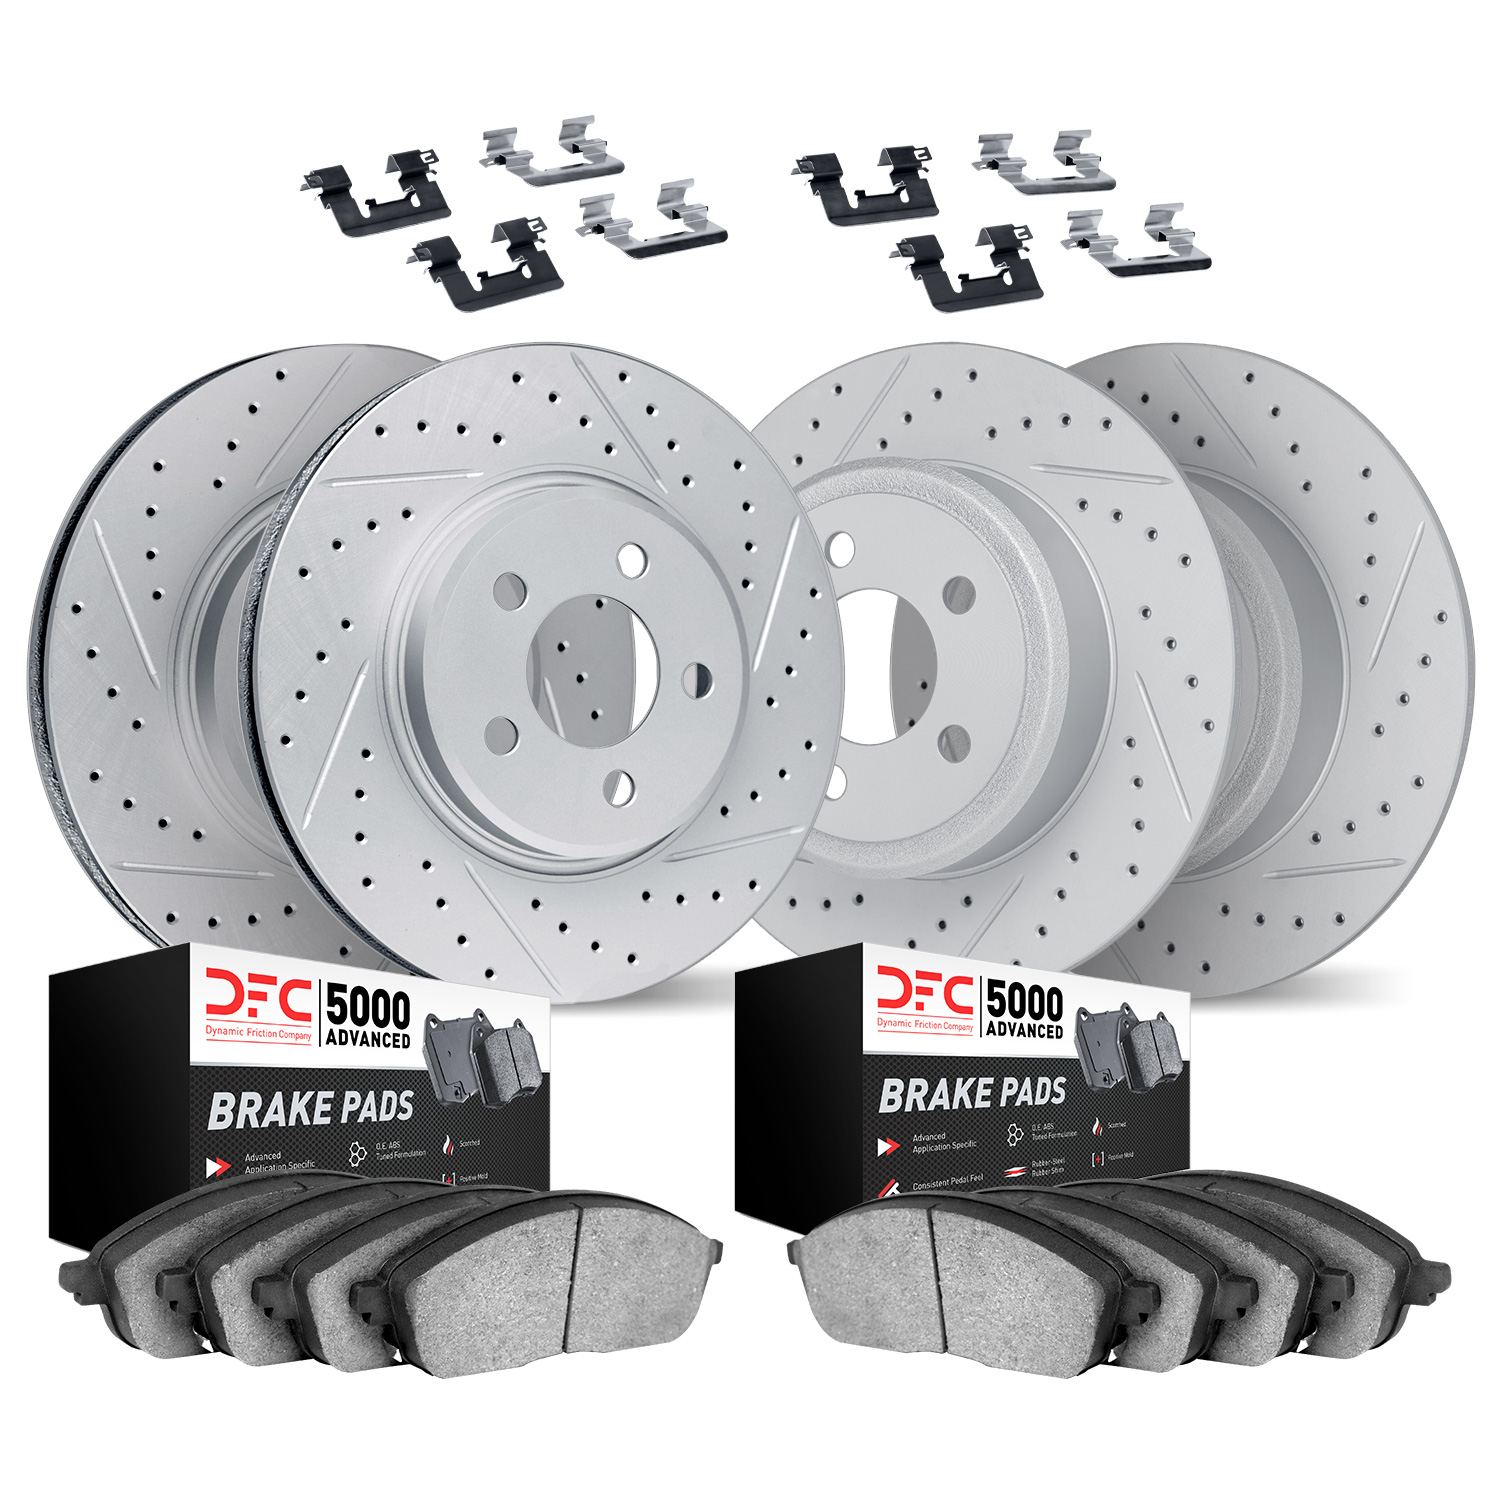 2514-59084 Geoperformance Drilled/Slotted Rotors w/5000 Advanced Brake Pads Kit & Hardware, Fits Select Acura/Honda, Position: F